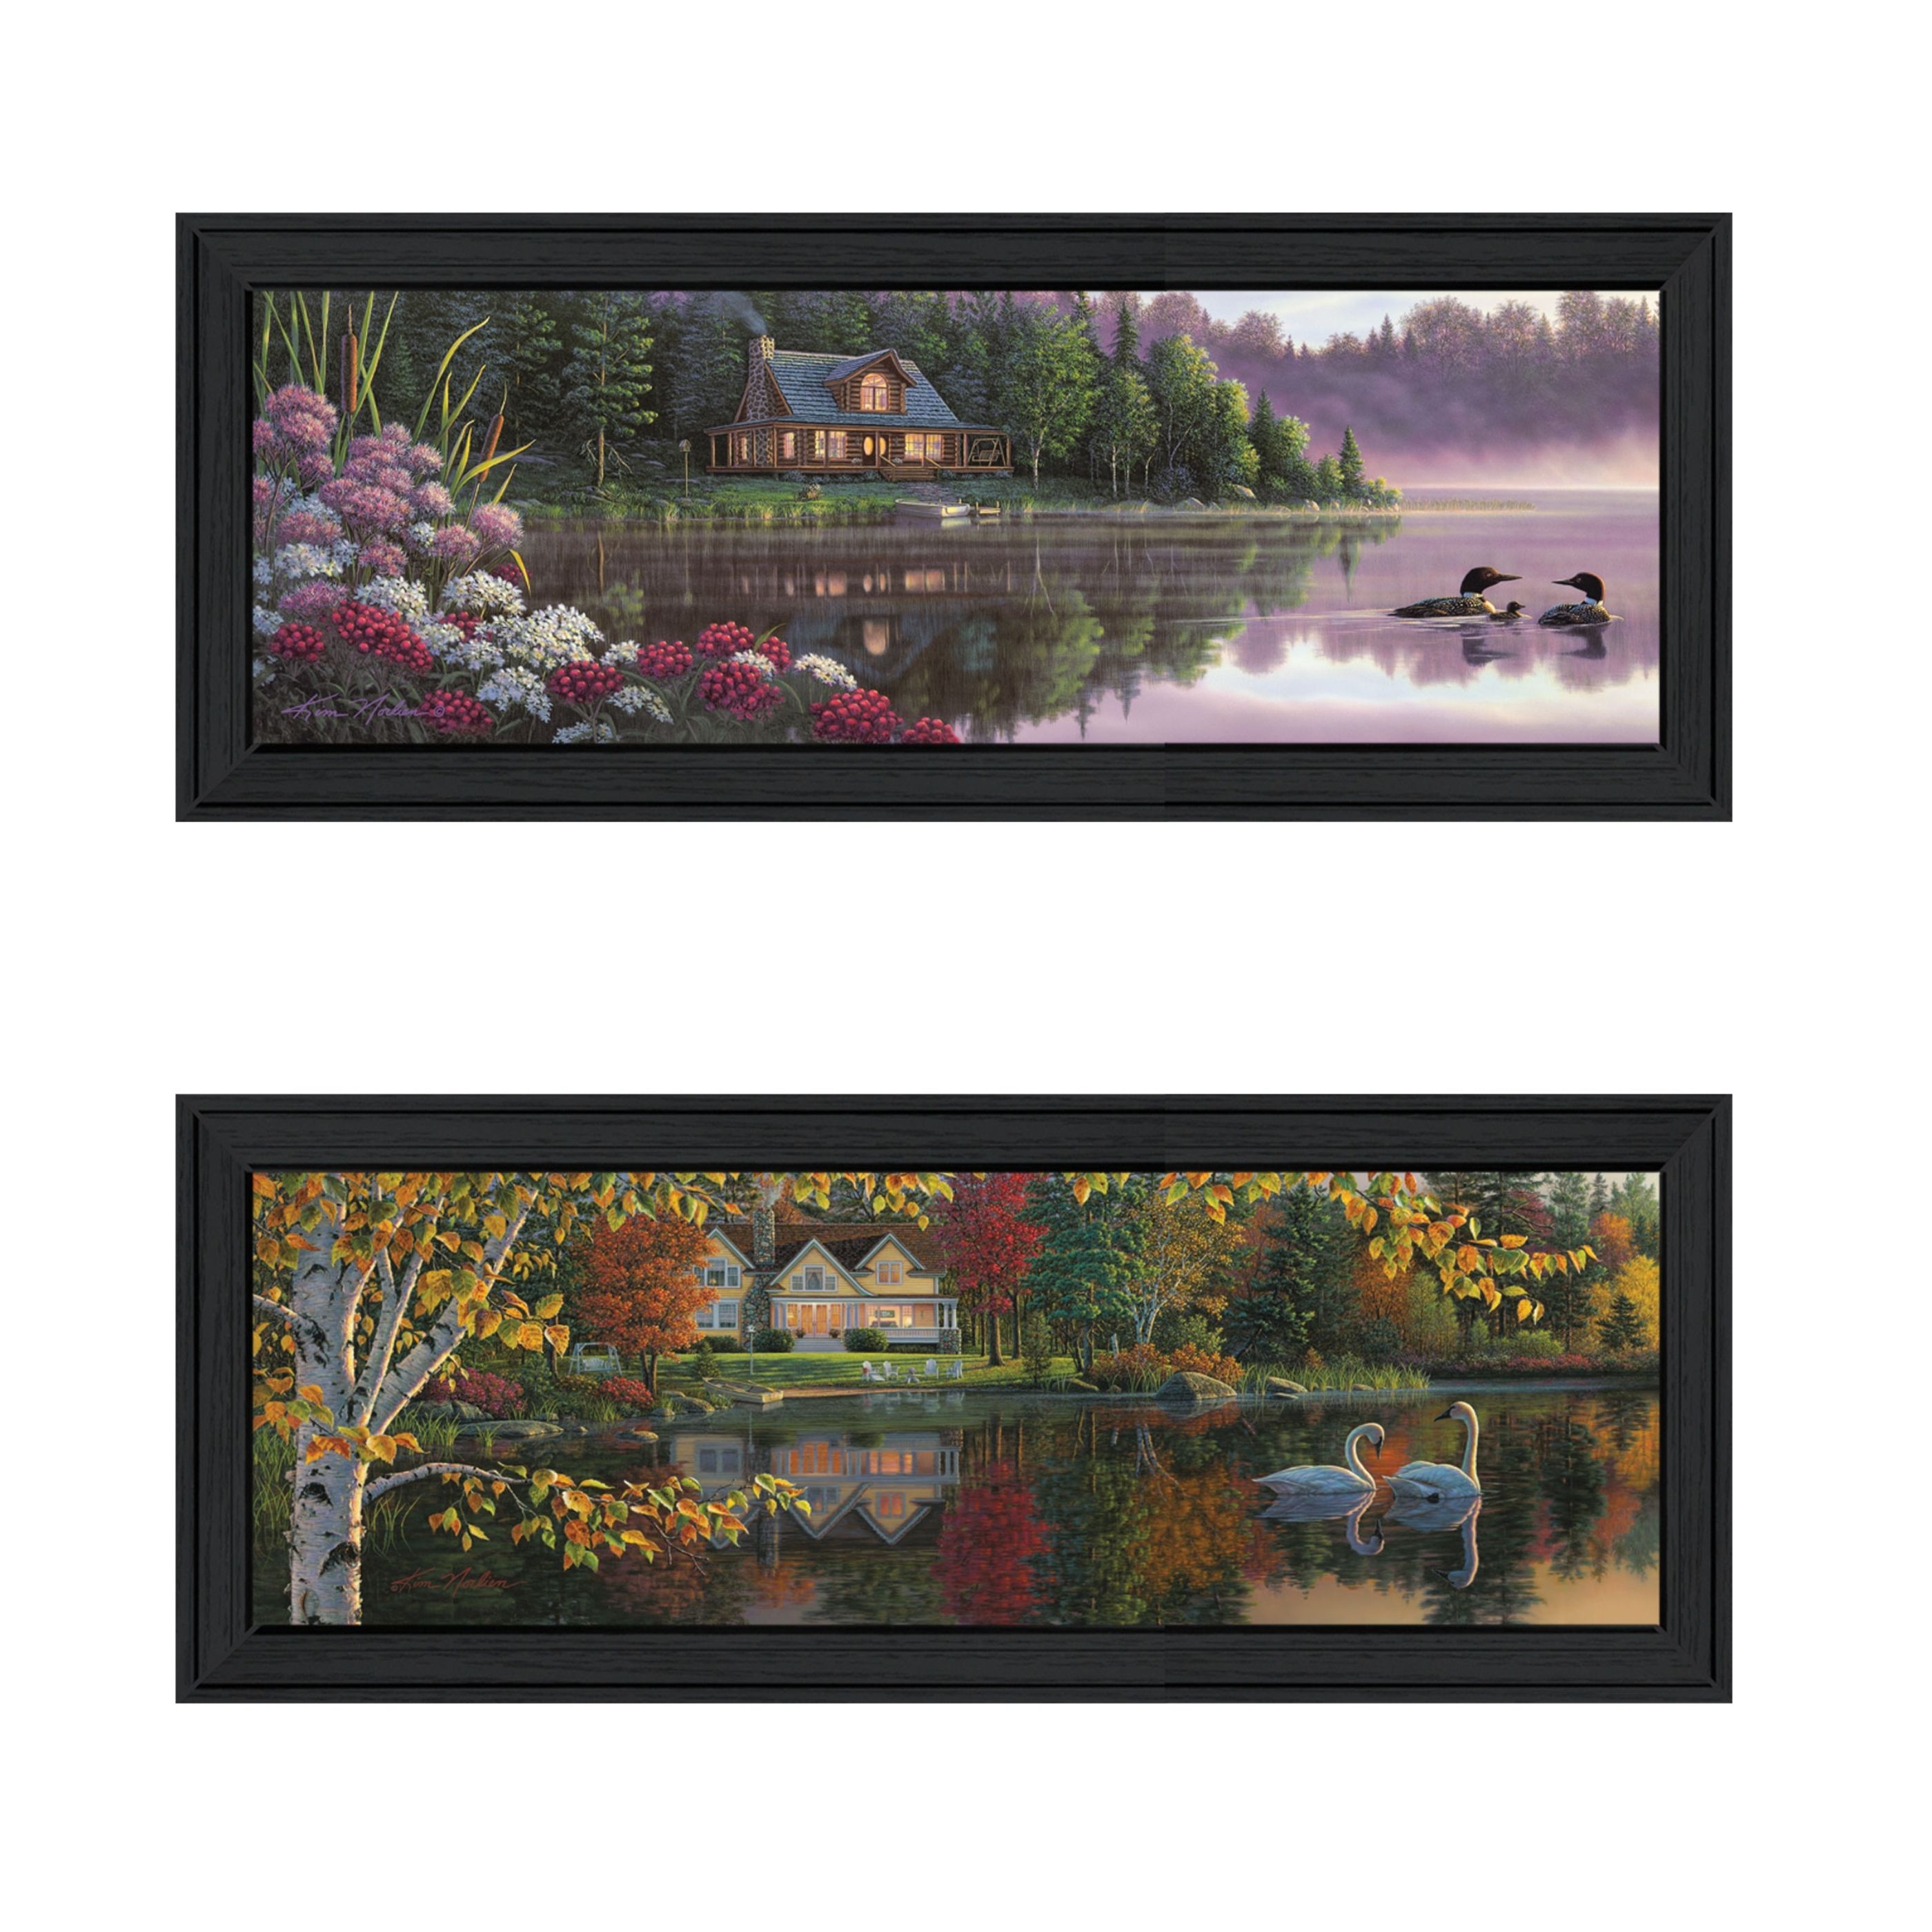 "Lake Panoramic Beauty Collection" 2-Piece Vignette By Kim Norlien, Printed Wall Art, Ready To Hang Framed Poster, Black Frame